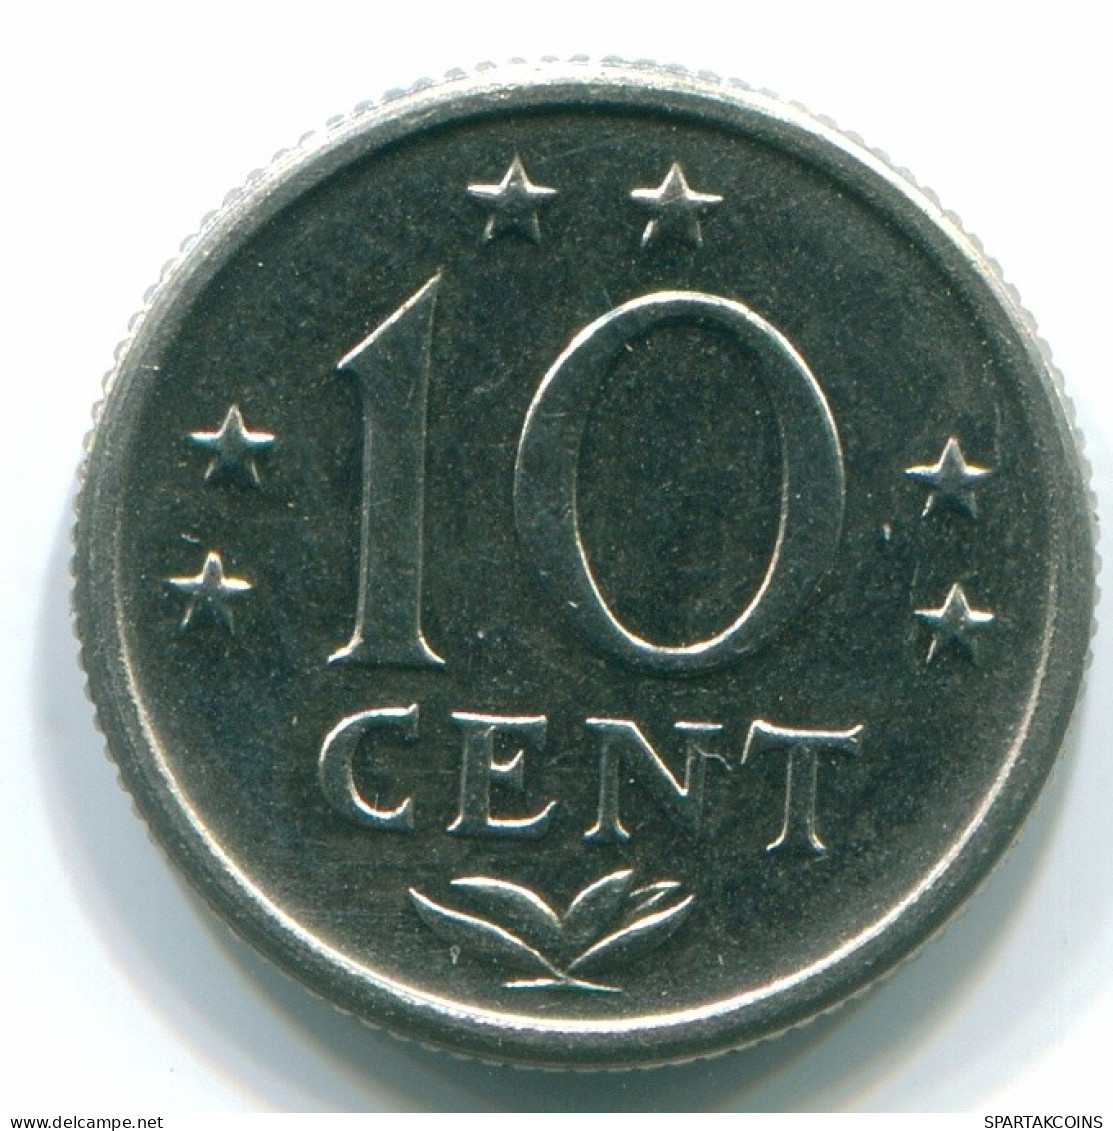 10 CENTS 1974 NETHERLANDS ANTILLES Nickel Colonial Coin #S13512.U.A - Antille Olandesi